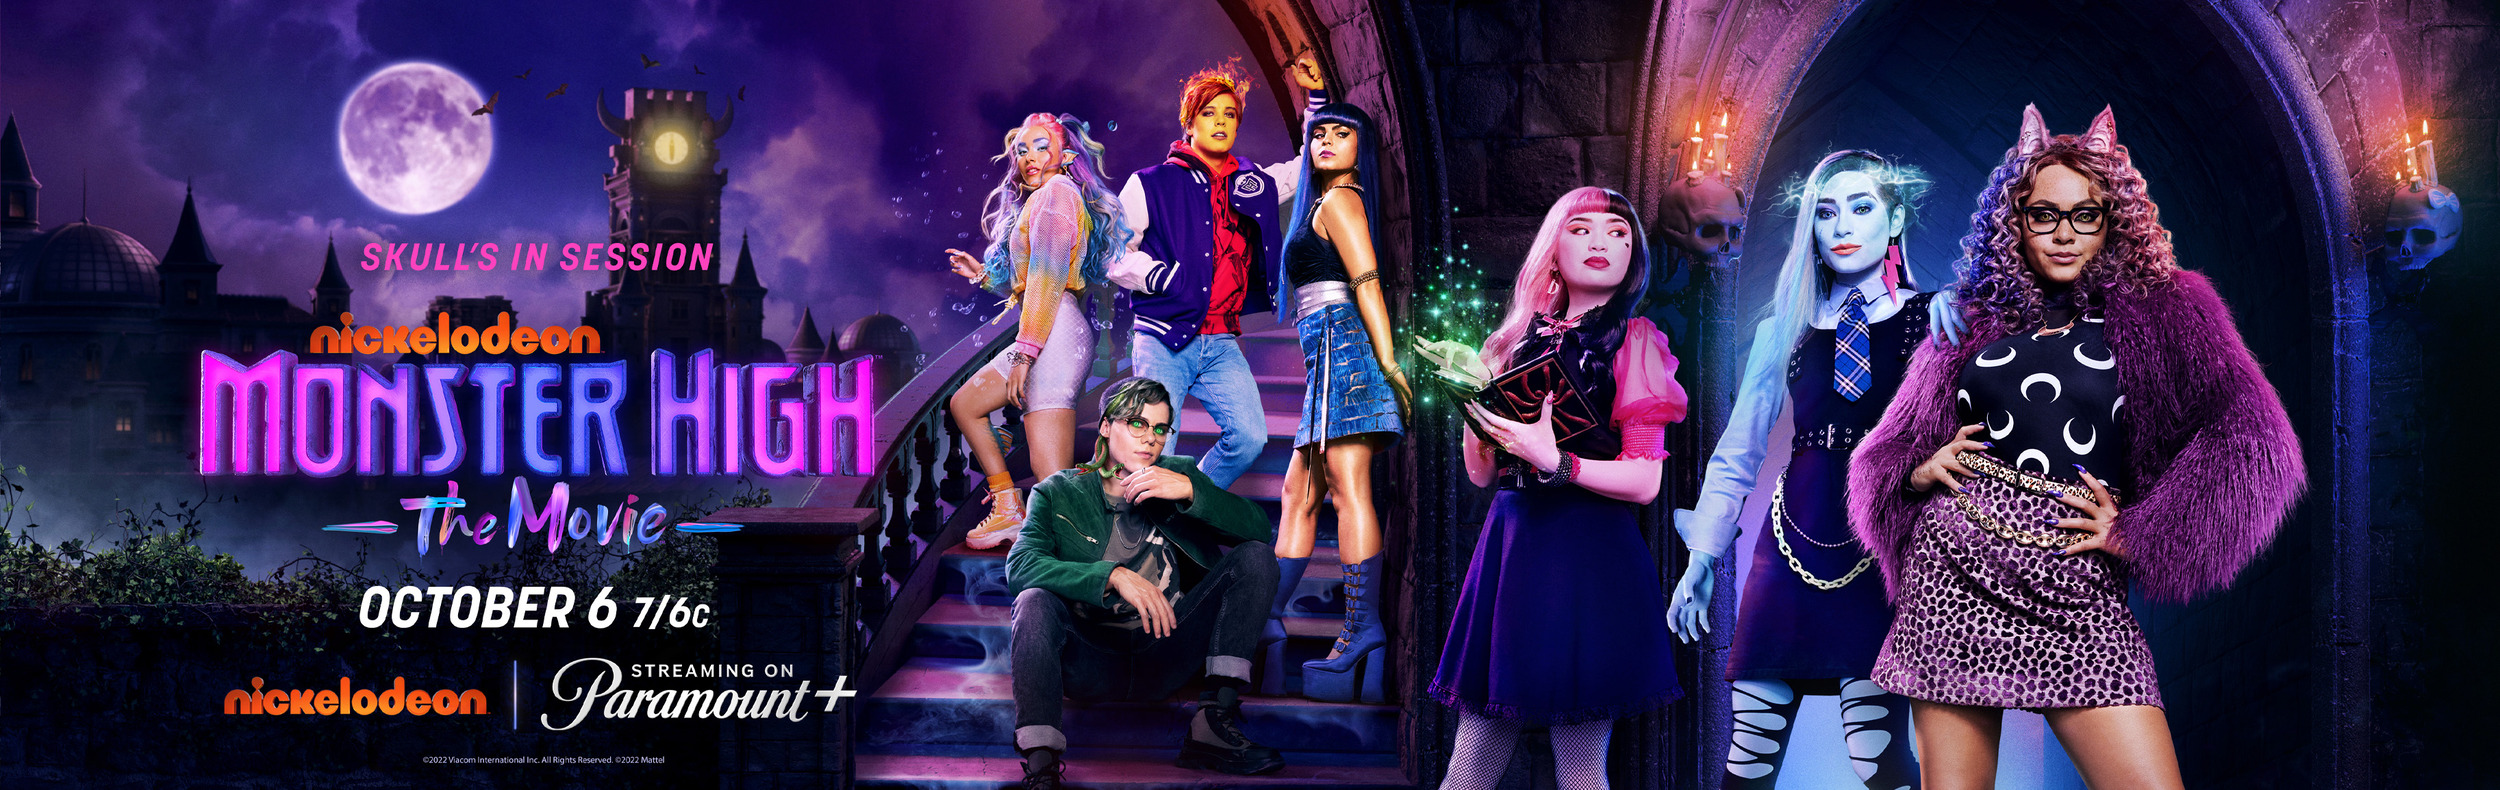 Mega Sized TV Poster Image for Monster High: The Movie (#13 of 13)